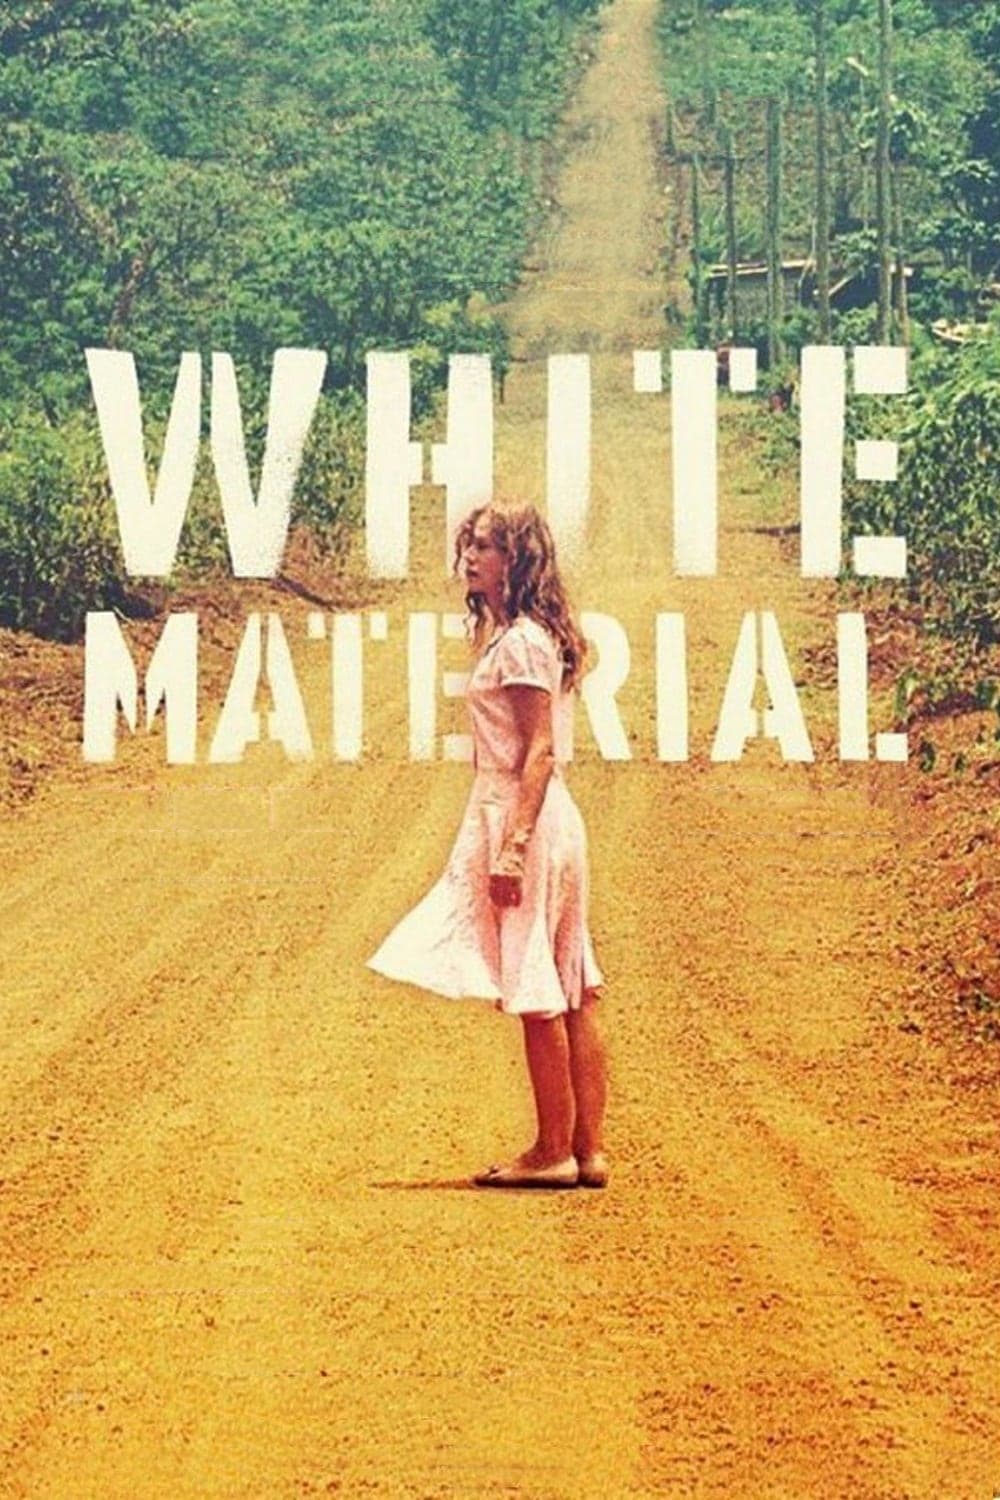 White Material (2010)